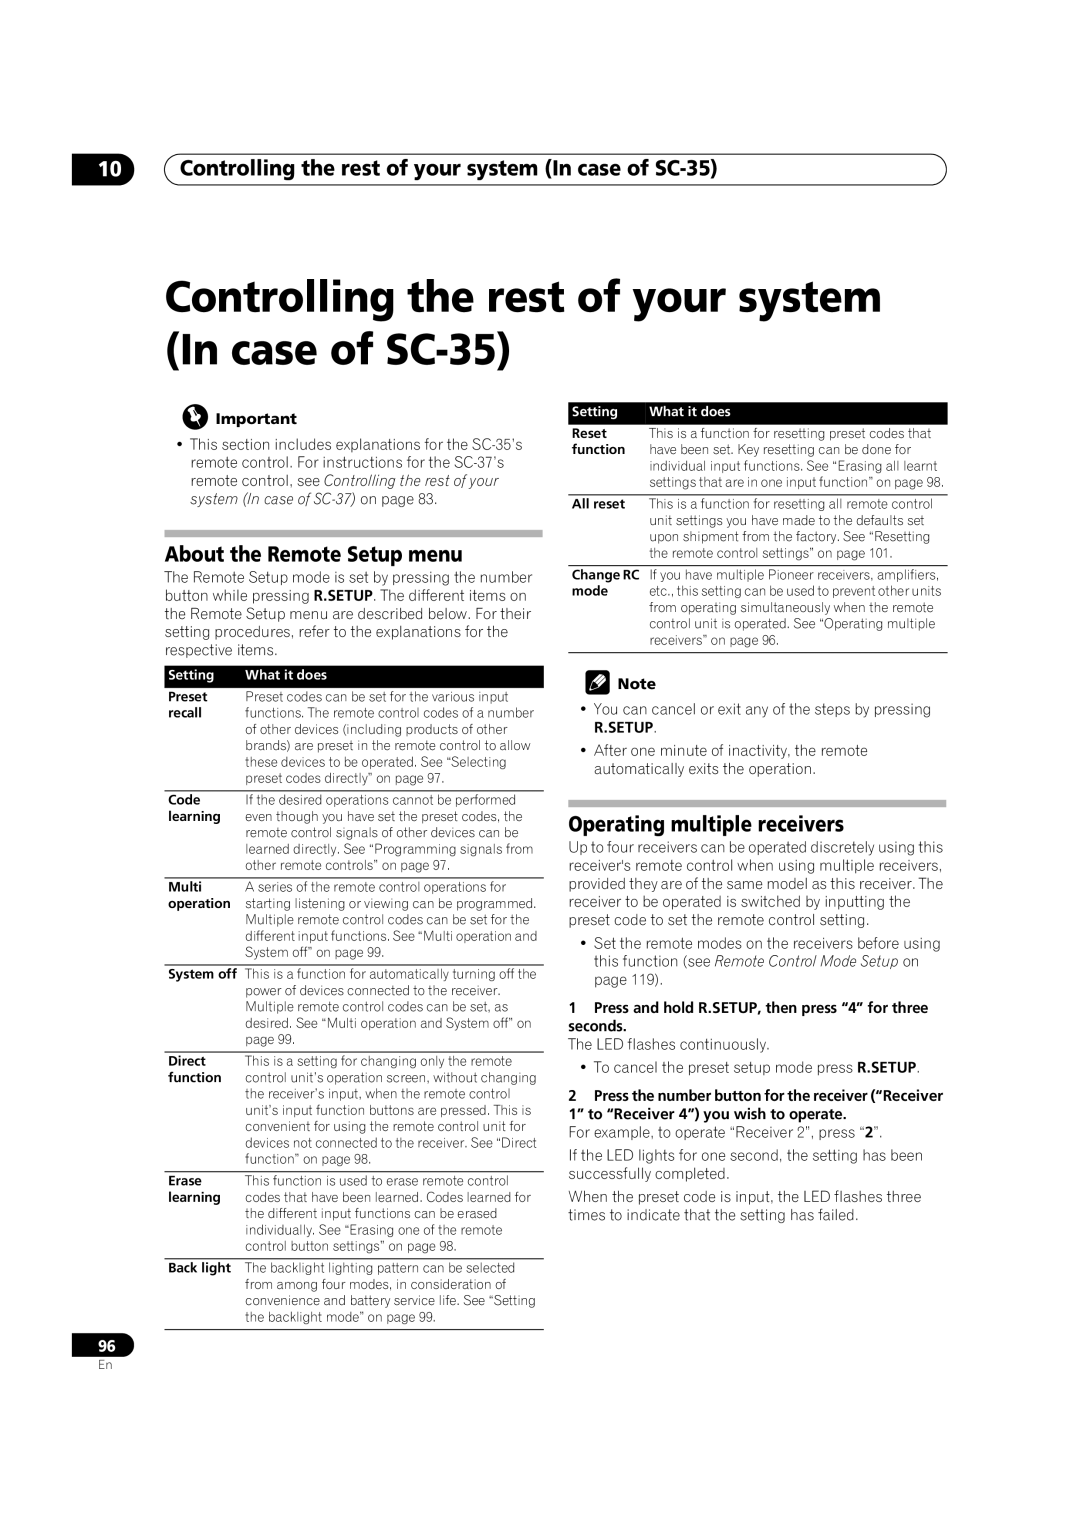 Pioneer SC-35 manual About the Remote Setup menu, Operating multiple receivers 